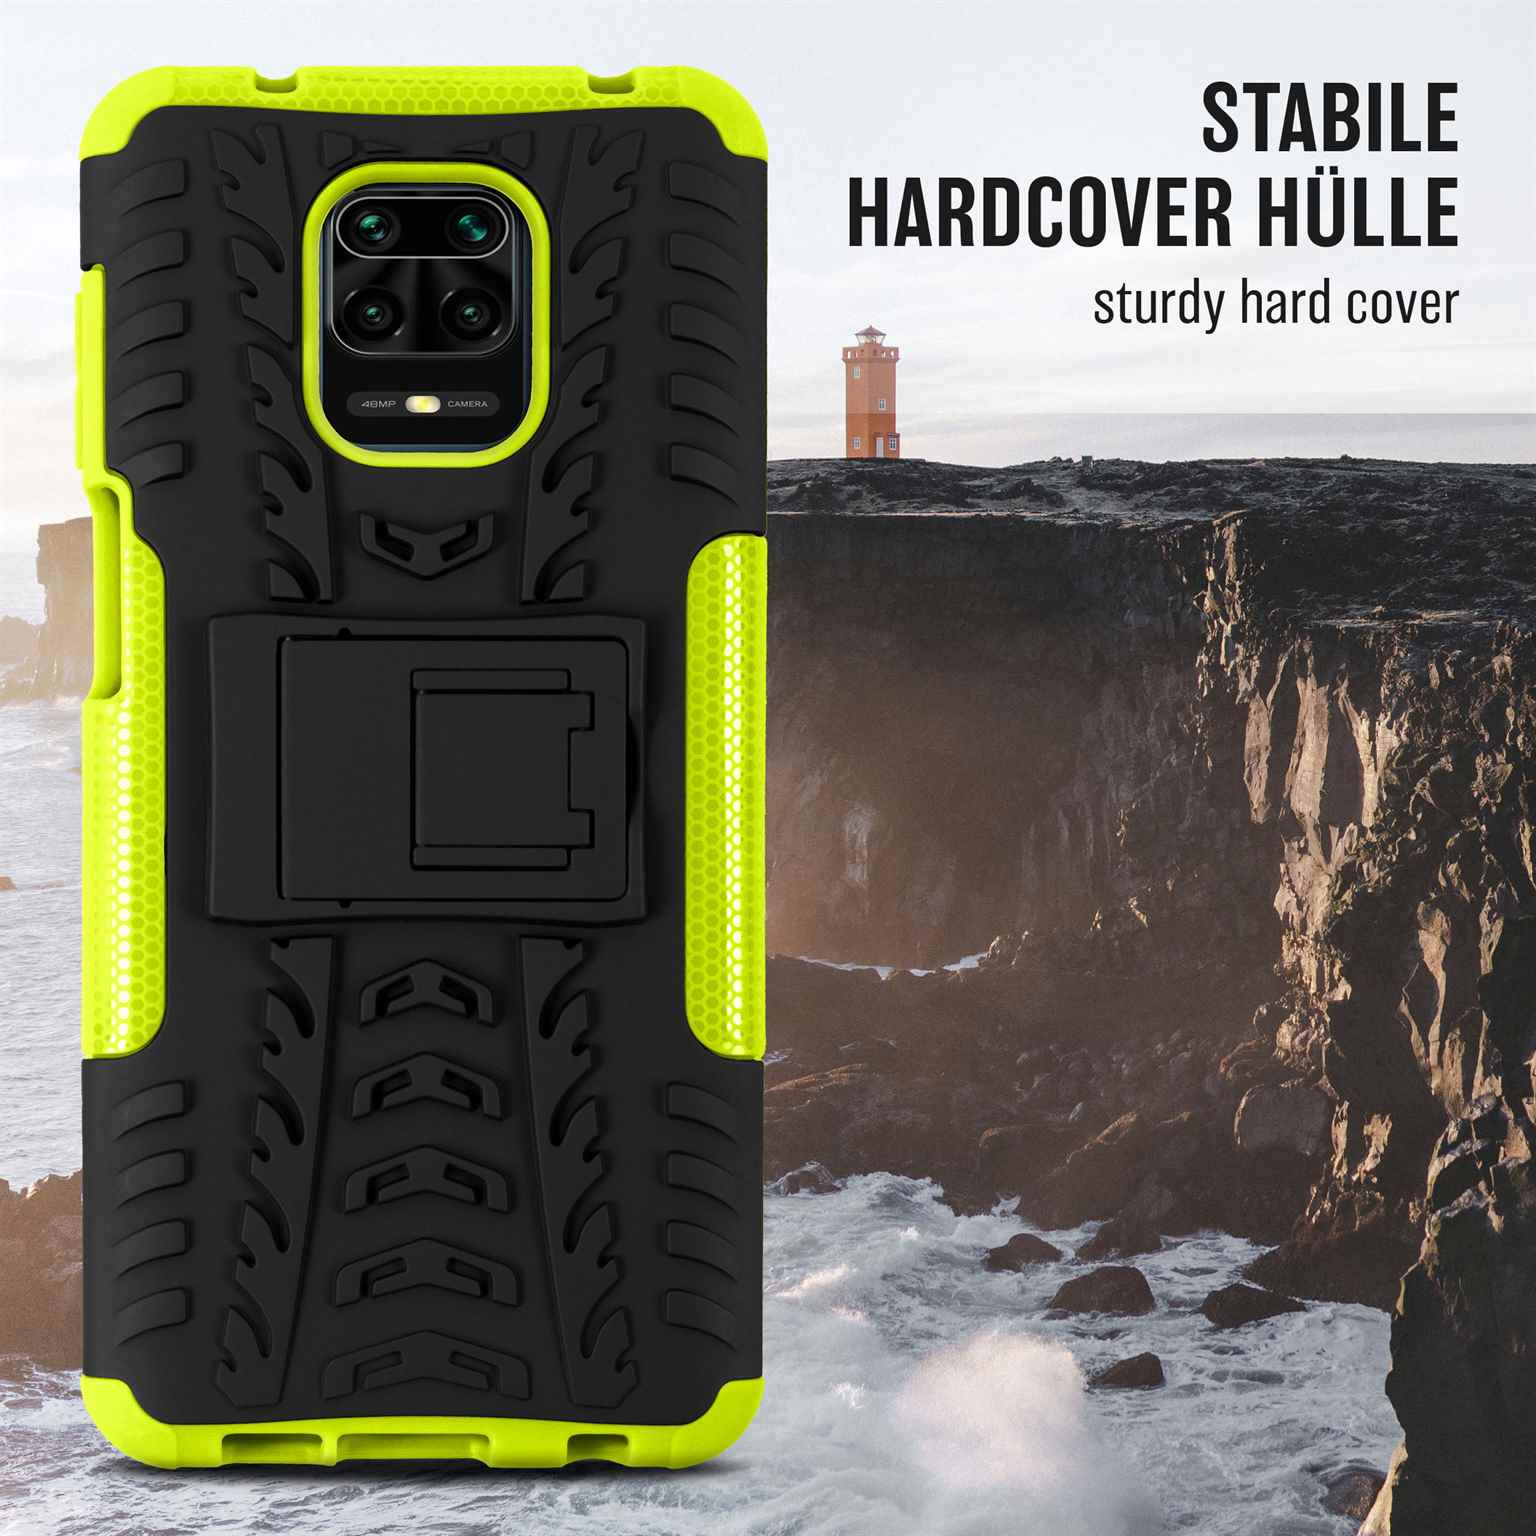 ONEFLOW Tank Case, Backcover, 9 Lime Xiaomi, Pro, Redmi Note